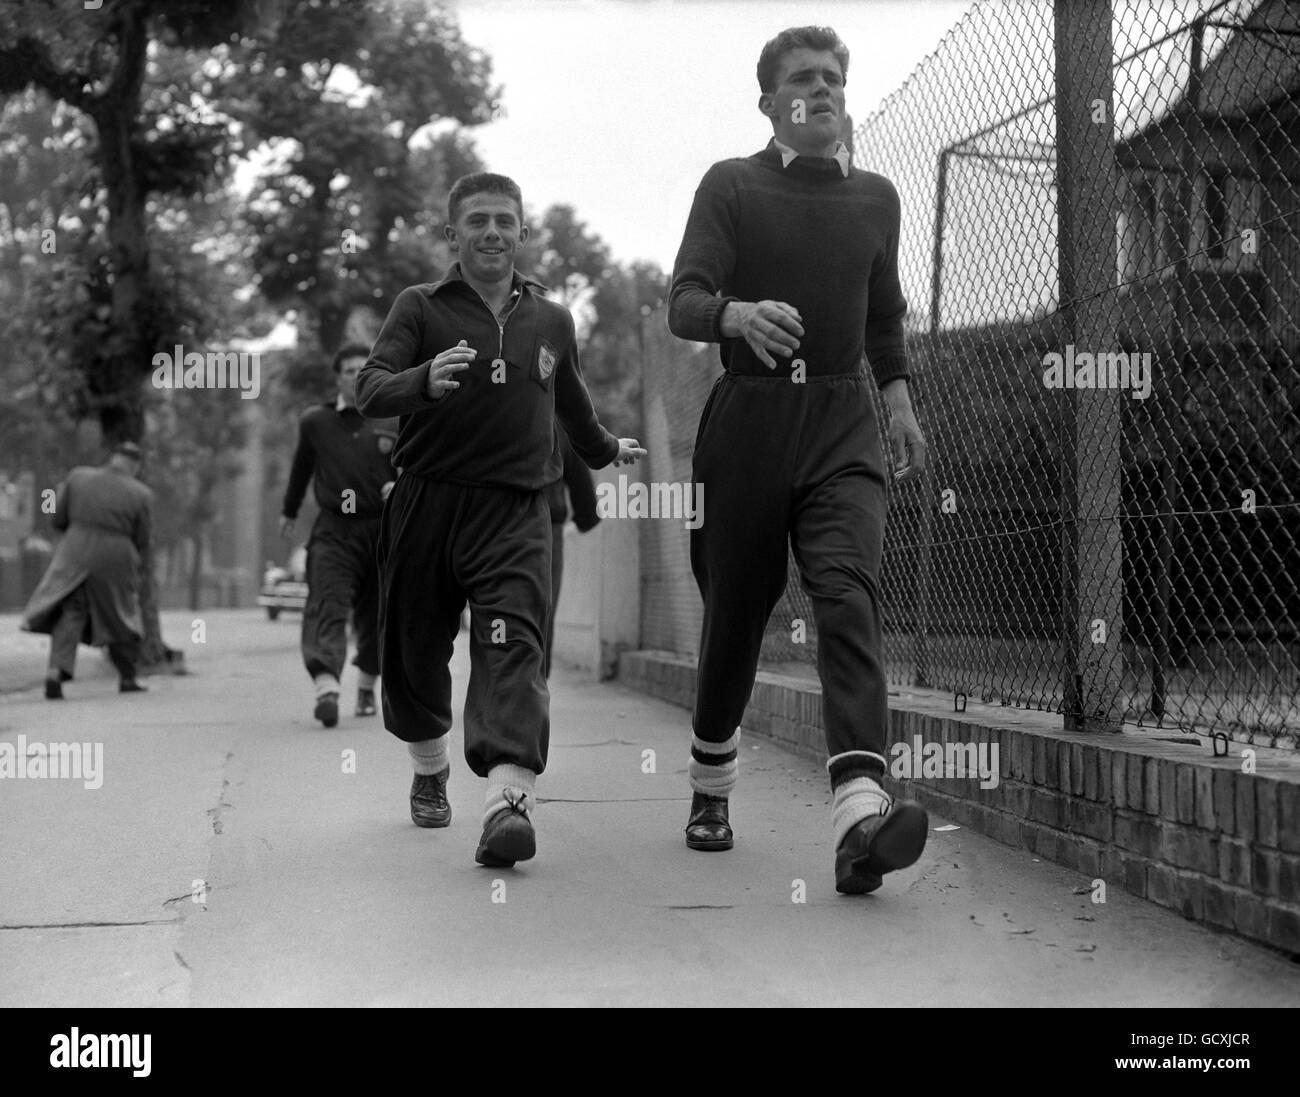 Soccer - League Division One - Arsenal Training Stock Photo